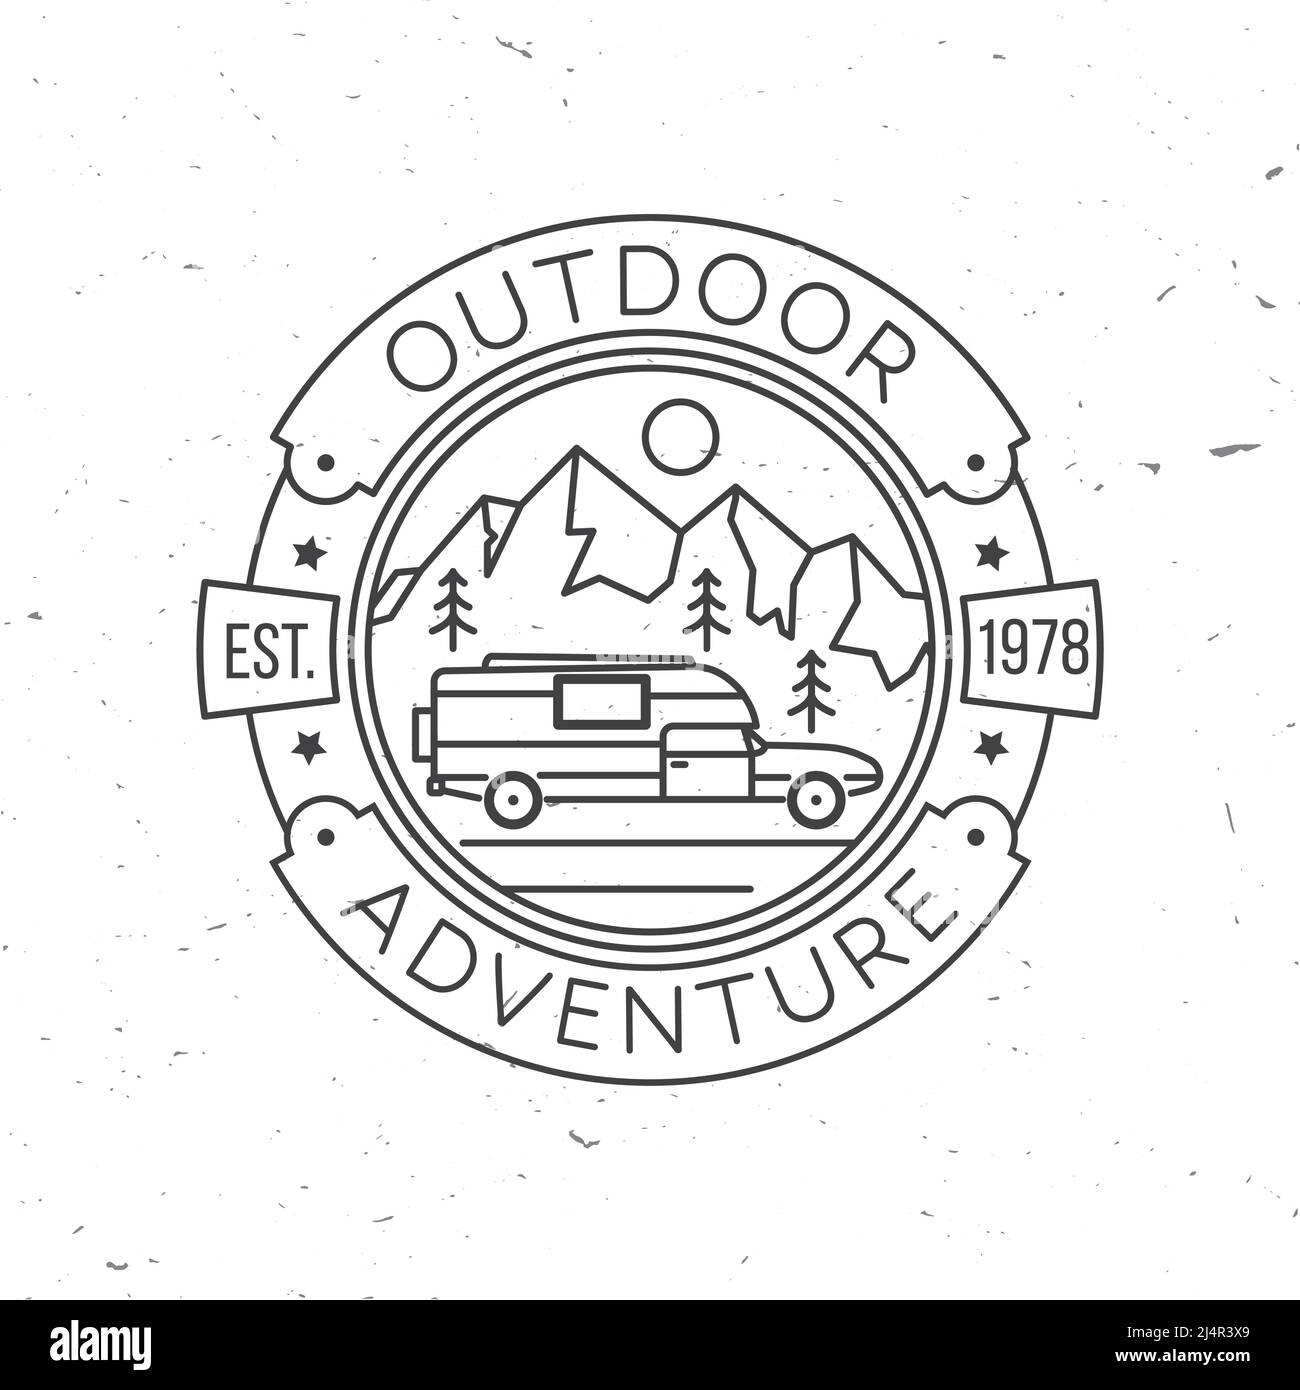 Outdoor adventure. Vector illustration. Concept for shirt or print, stamp or tee. Vintage line art design with Camper trailer and mountain silhouette. Stock Vector